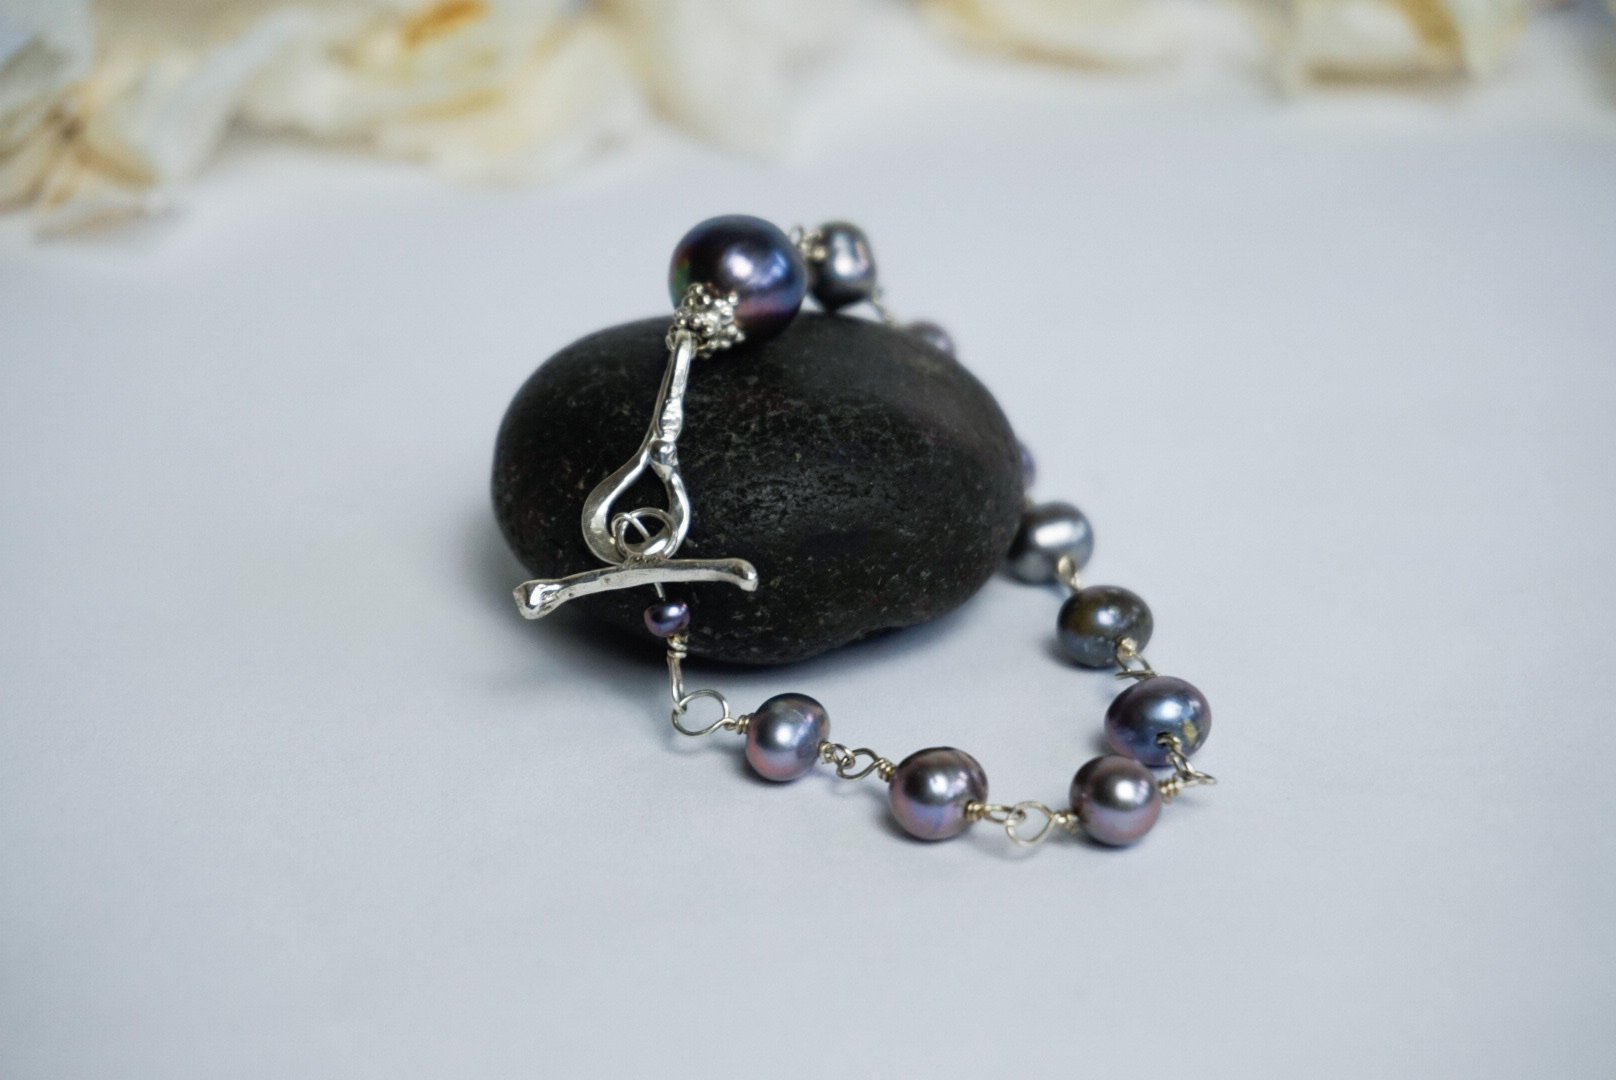 Peacock Pearl Bracelet with Sterling Silver Toggle Clasp